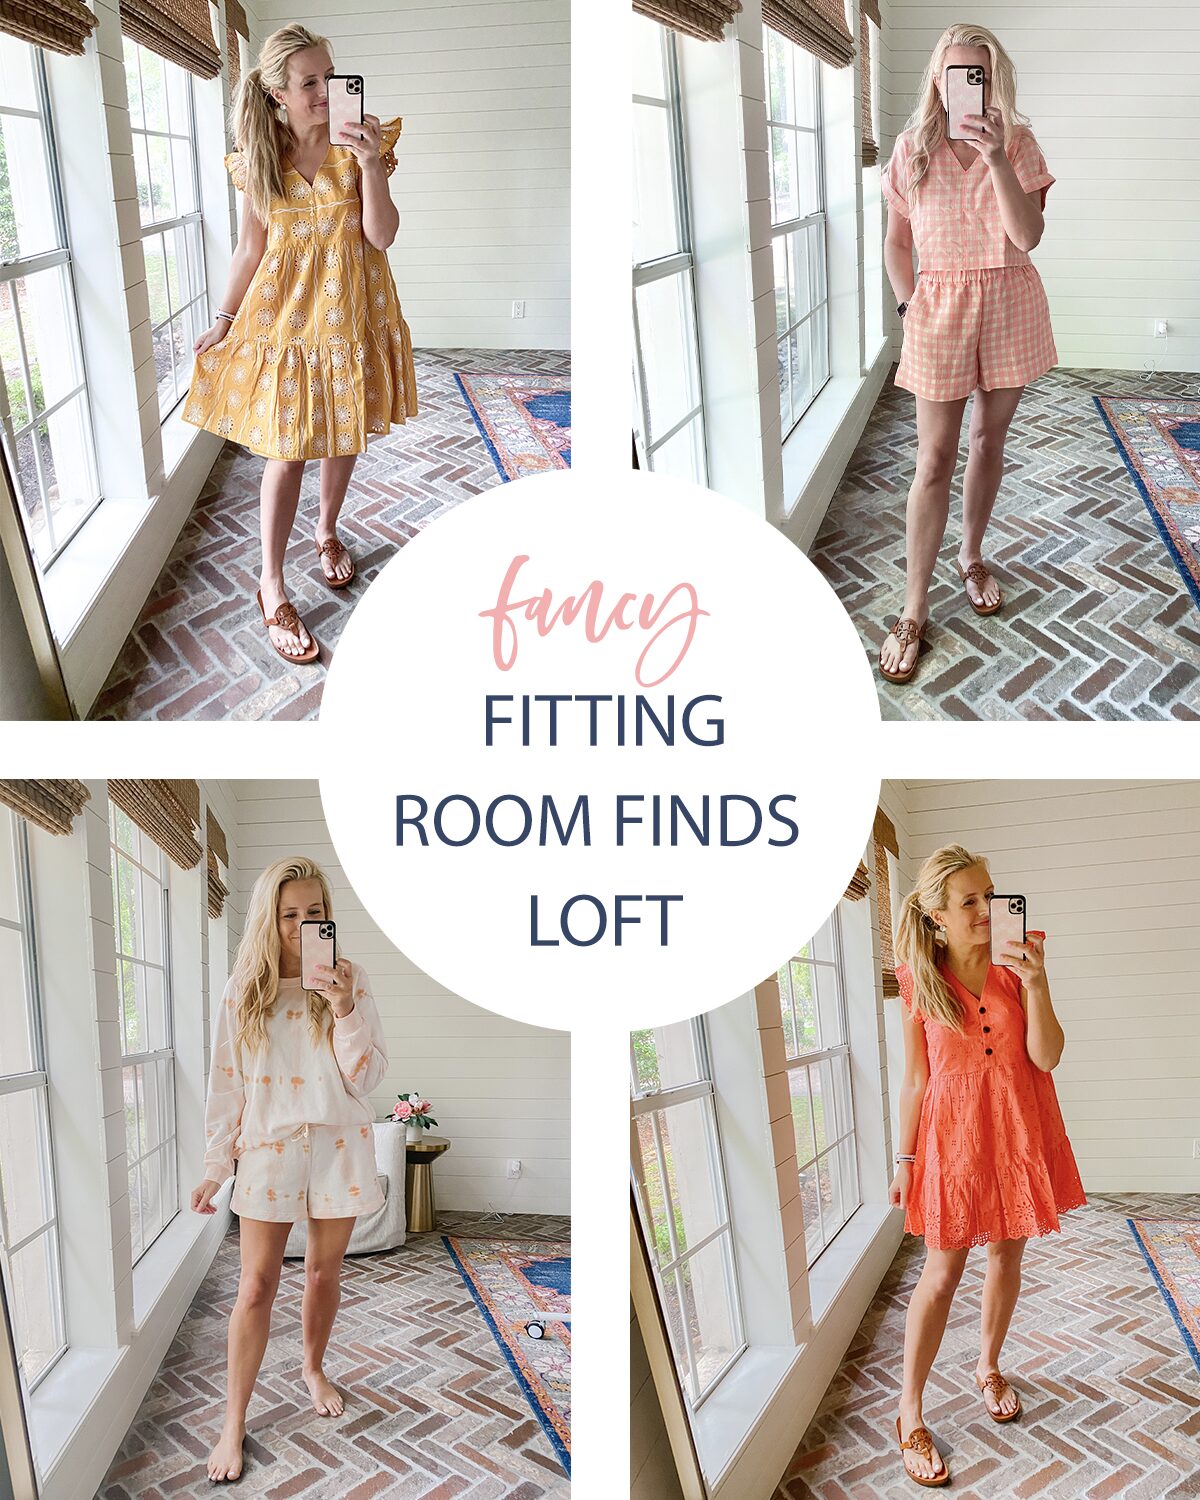 Loft Clothing by popular Houston fashion blog, The House of Fancy: collage image of a woman wearing a Loft yellow eyelet dress, Loft orange gingham shirt and short set, Loft flamingo loungewear set, and Loft red button front dress.  